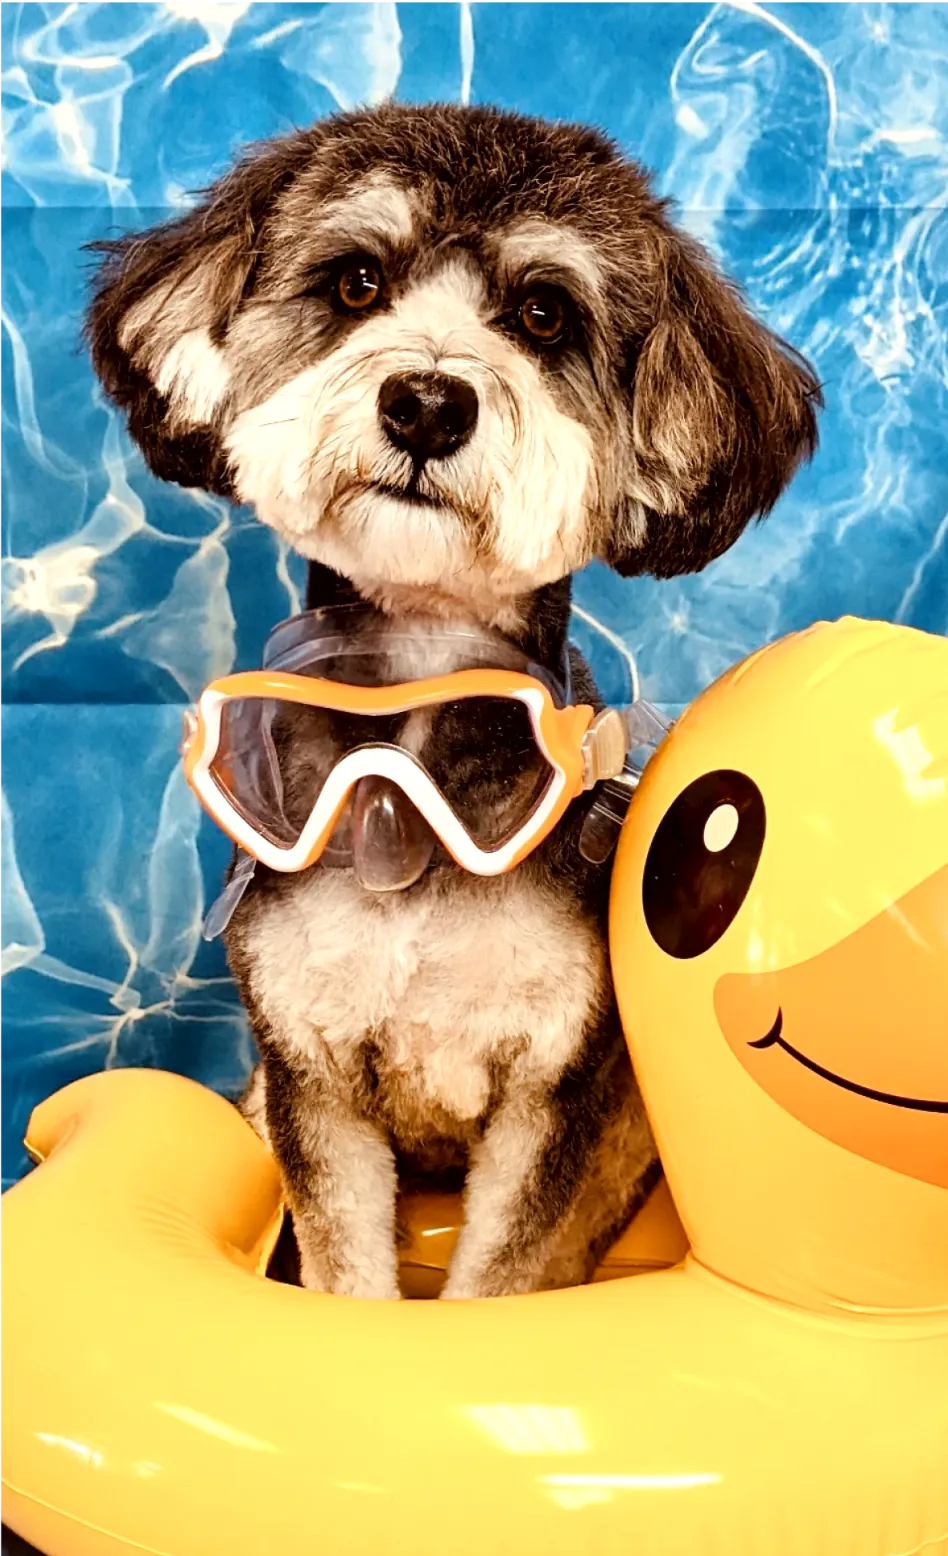 A Schnauzer dog with a grey and white coat posing for a pool-themed photoshoot. It’s wearing orange-rimmed goggles and sitting on a yellow inflatable with a smiley face design, against a blue water-like backdrop.